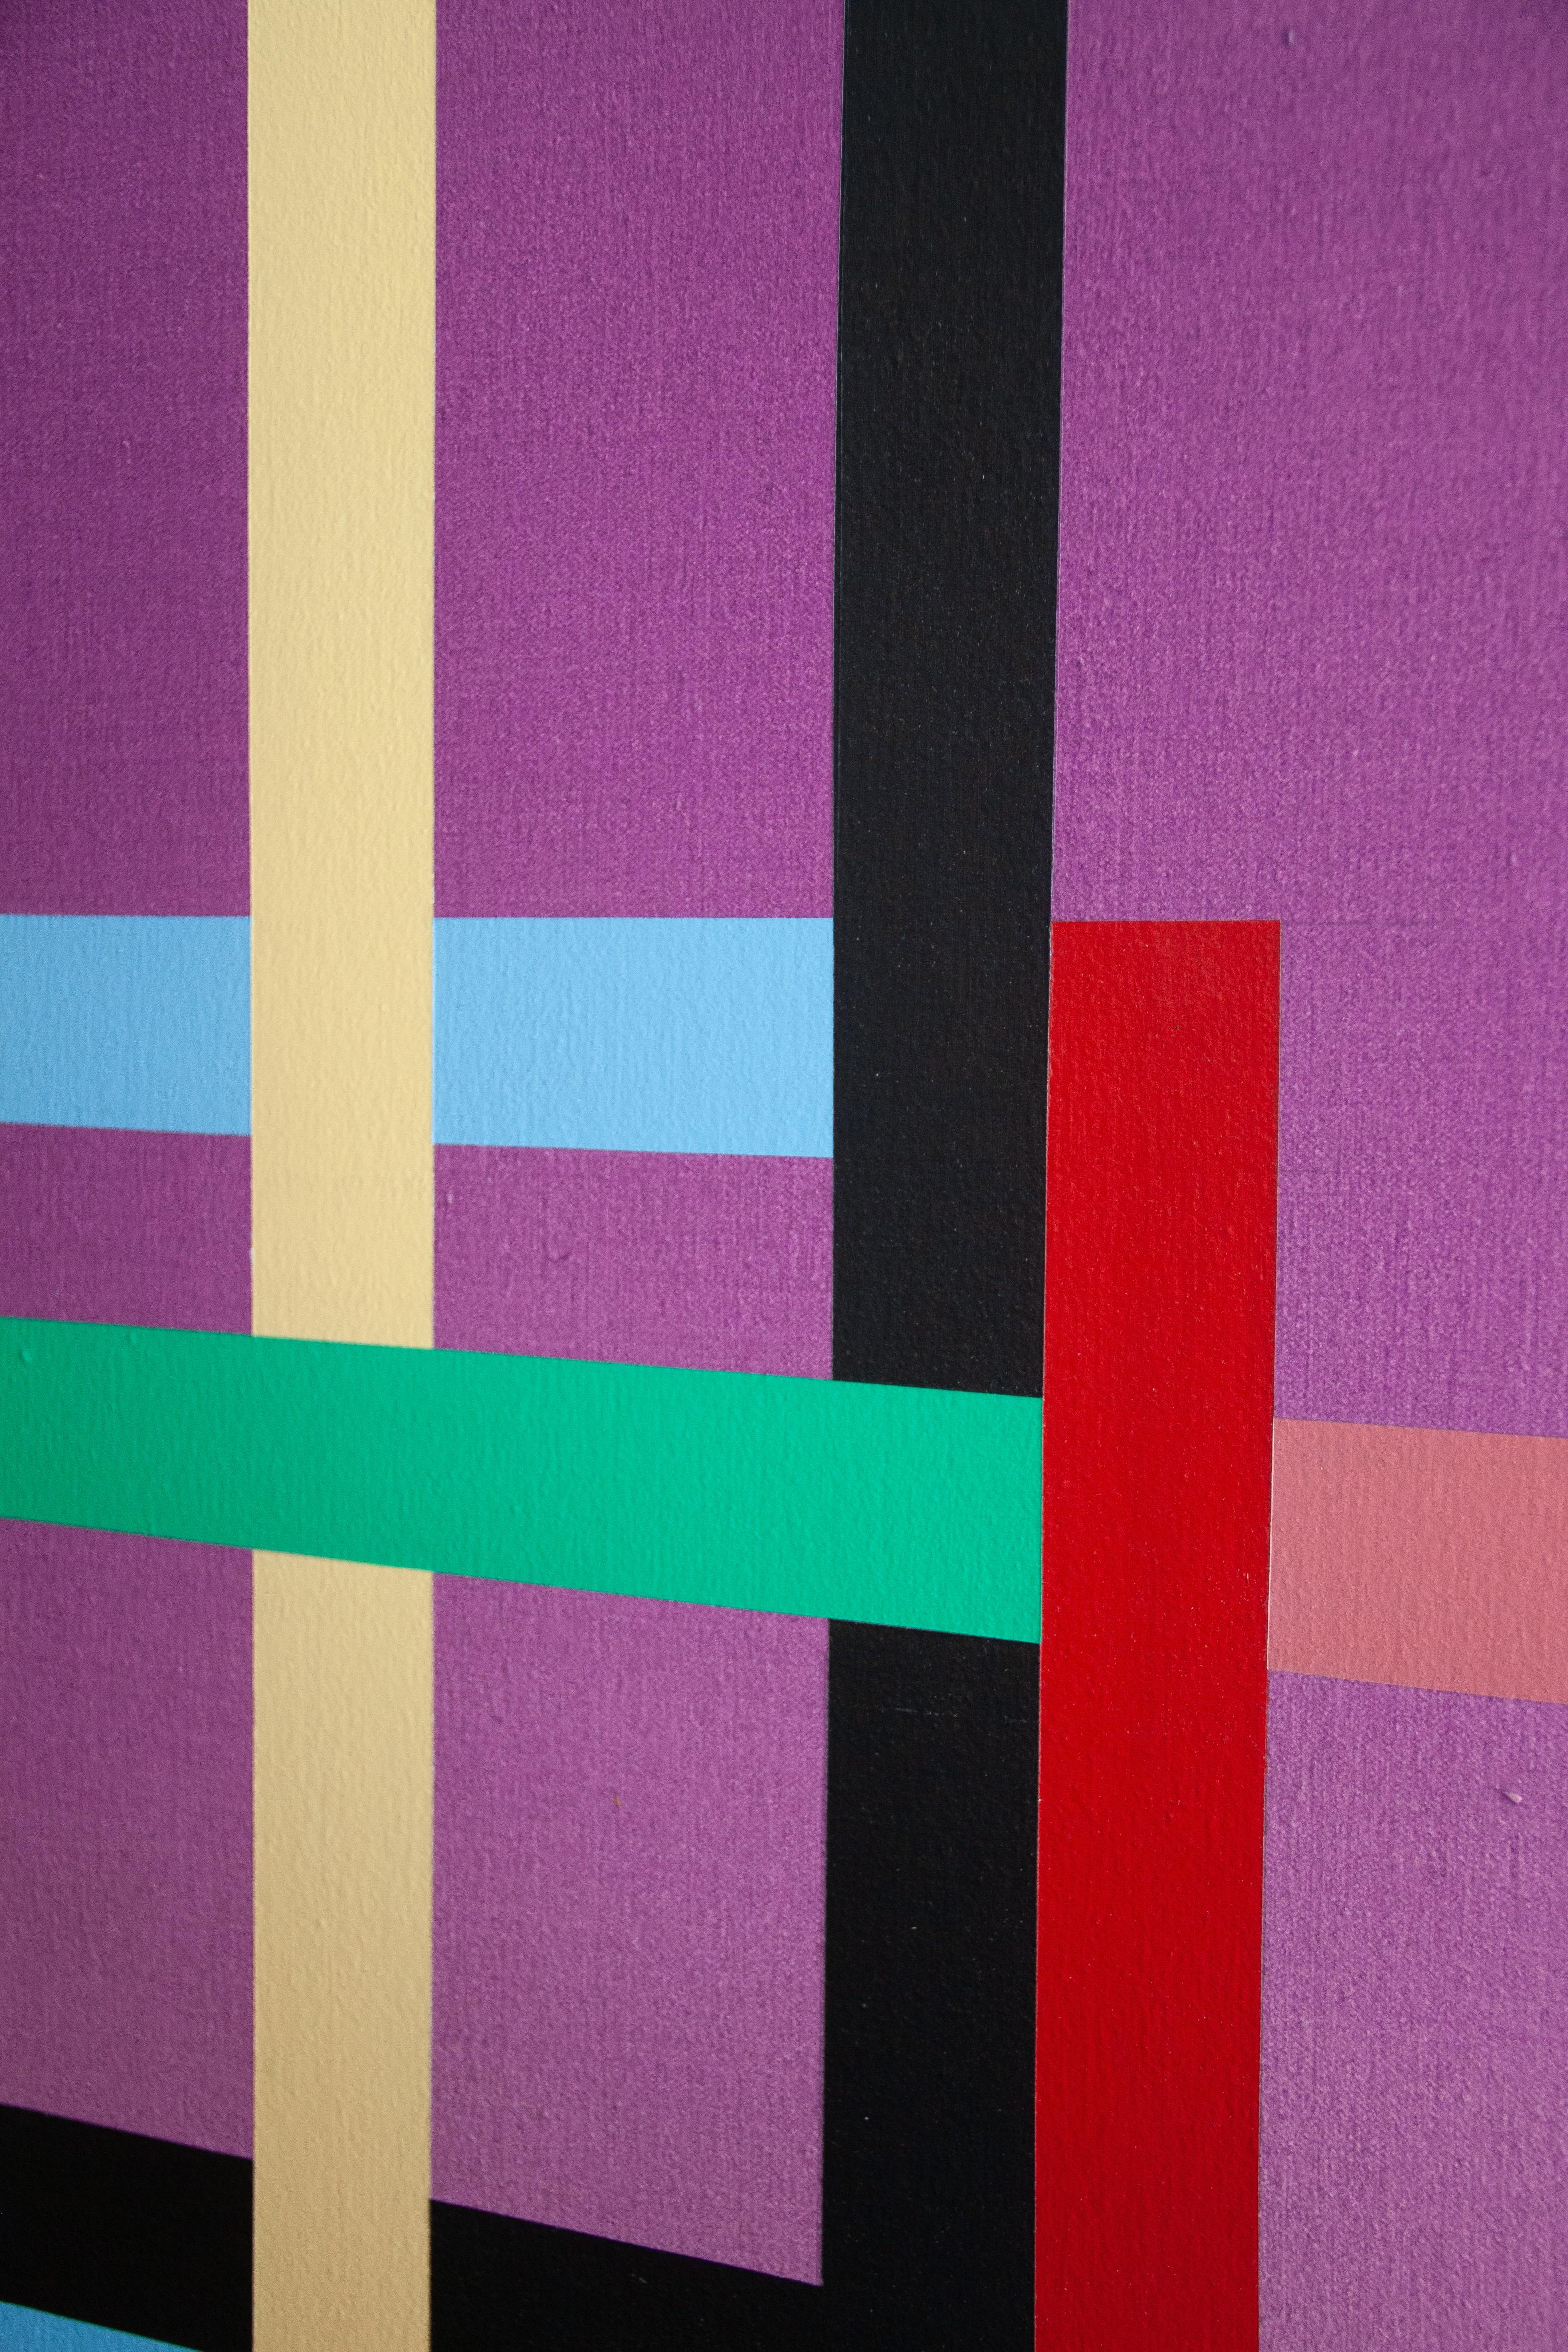 Close-up of a purple painting with intersecting, geometric lines by artist Christian Nguyen.